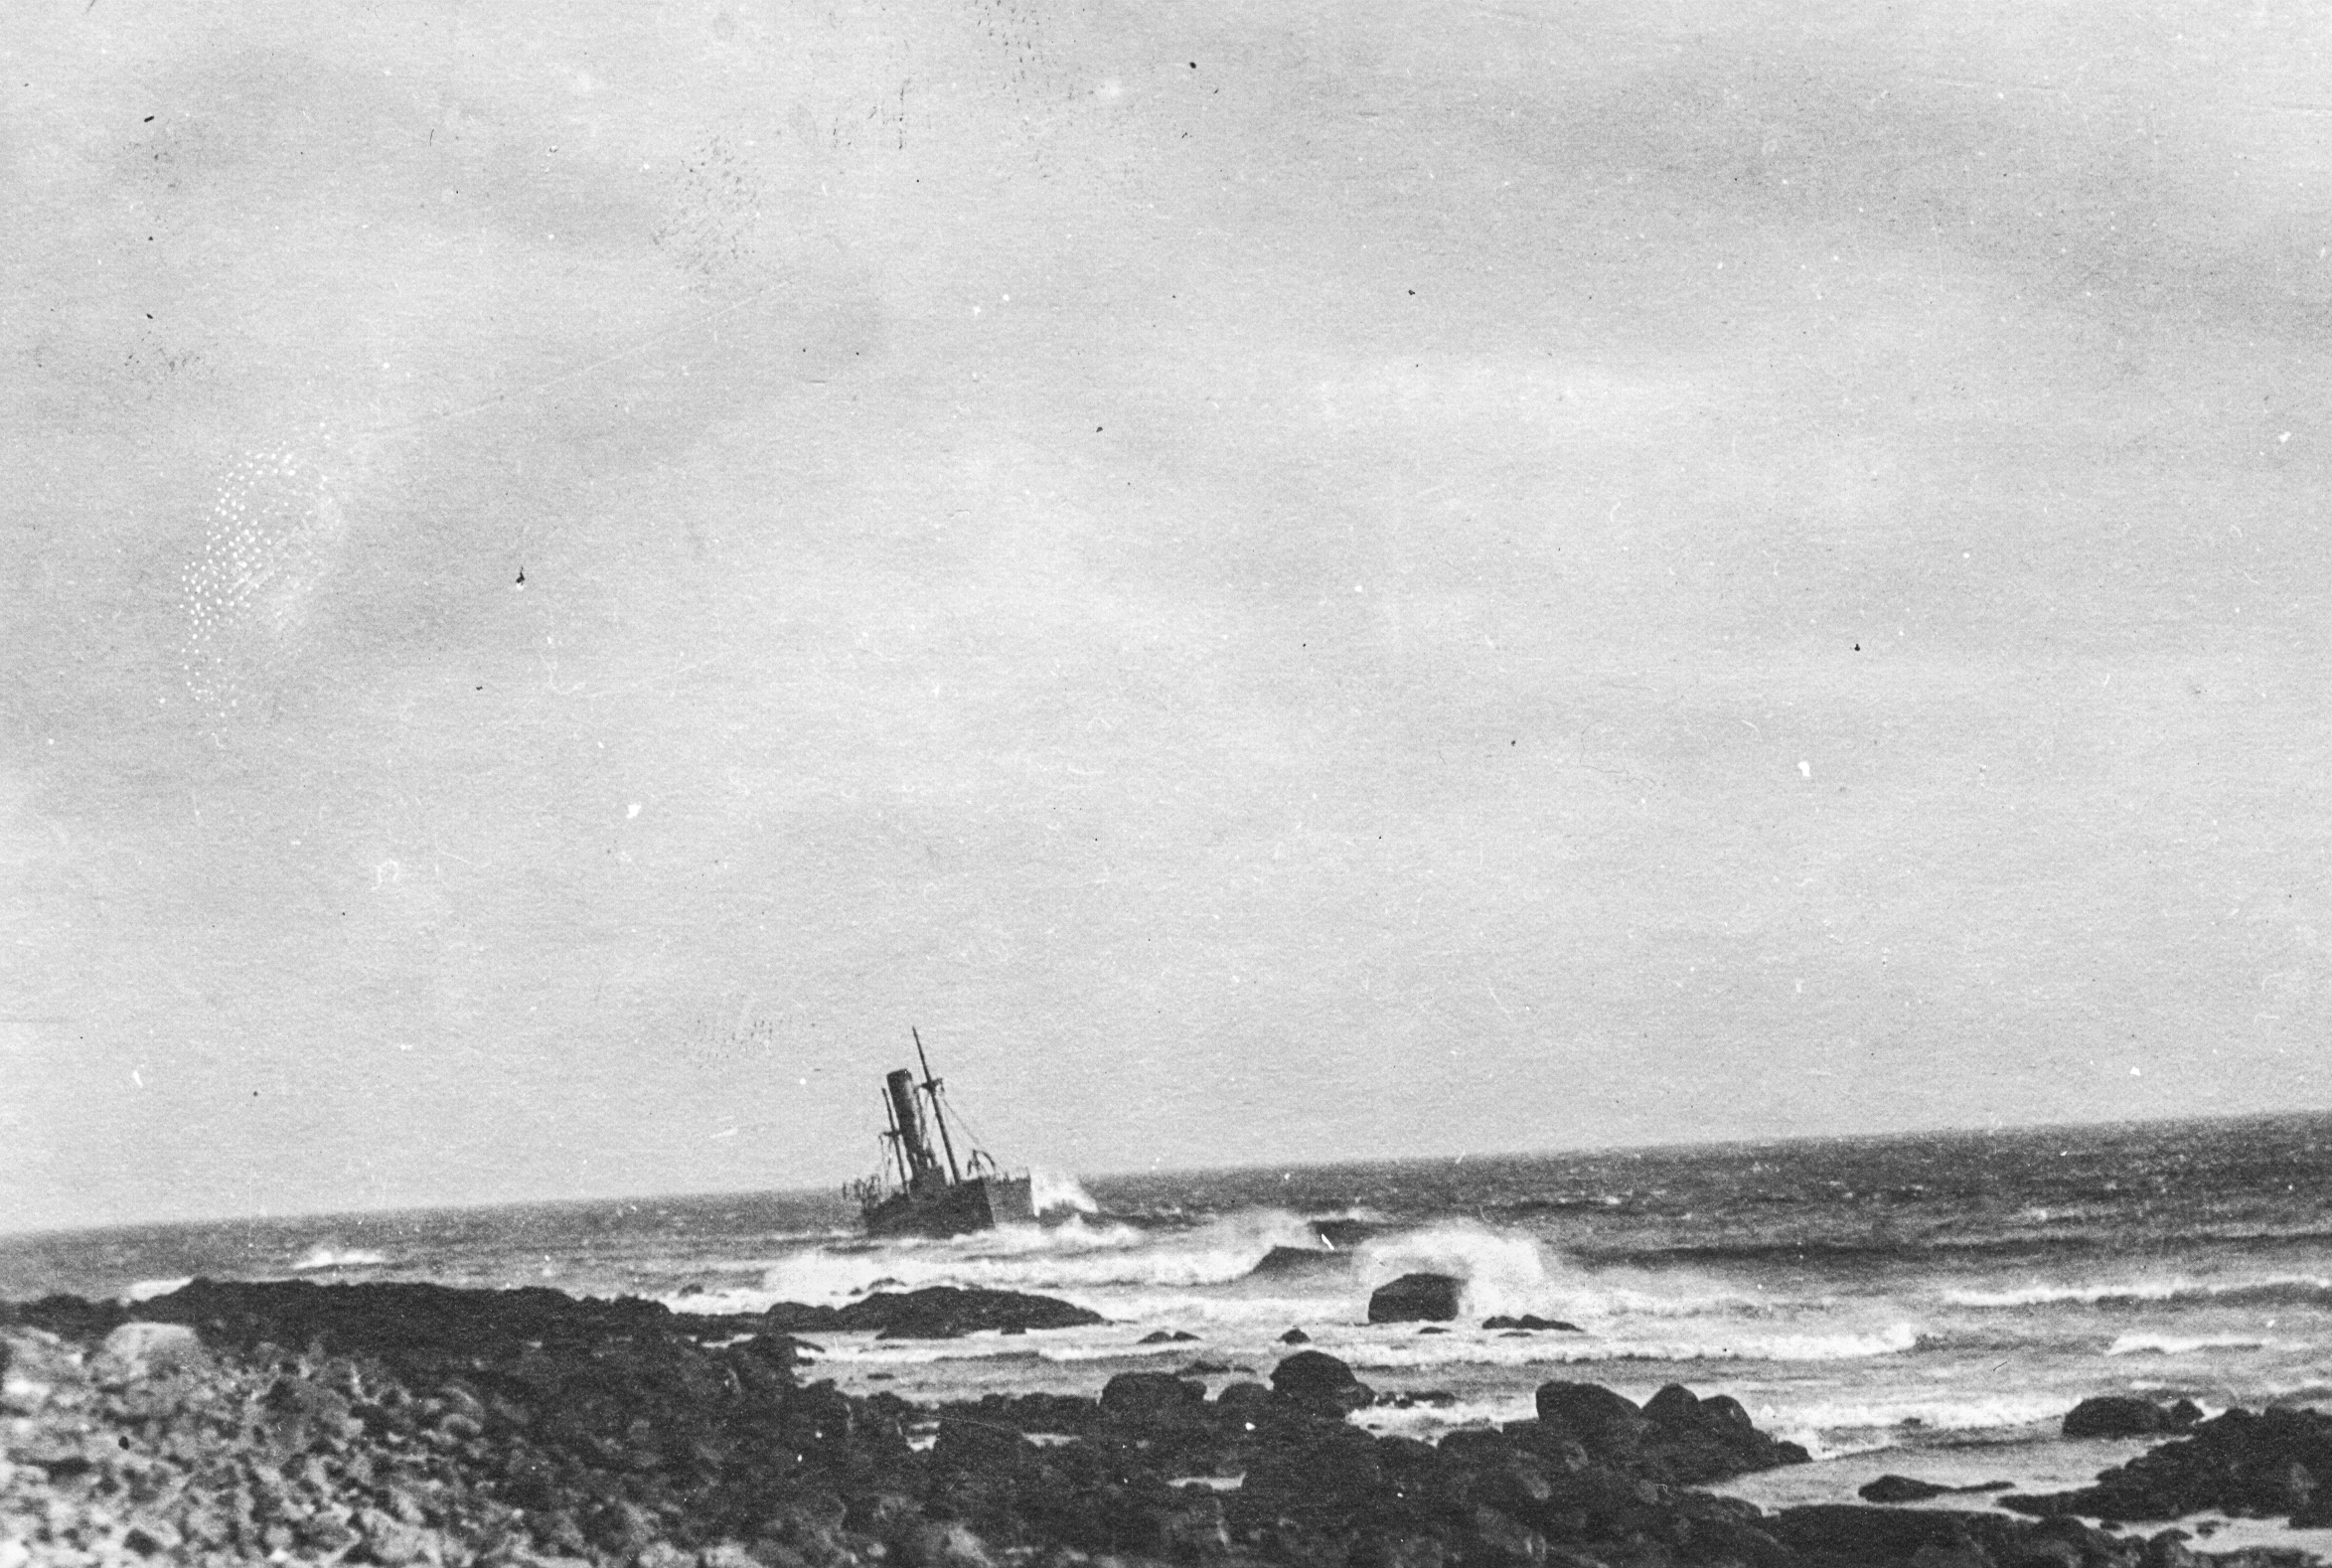 Black and white archival photograph of large passenger liner ship, the SS Florizel, run aground just offshore from rocky beach.